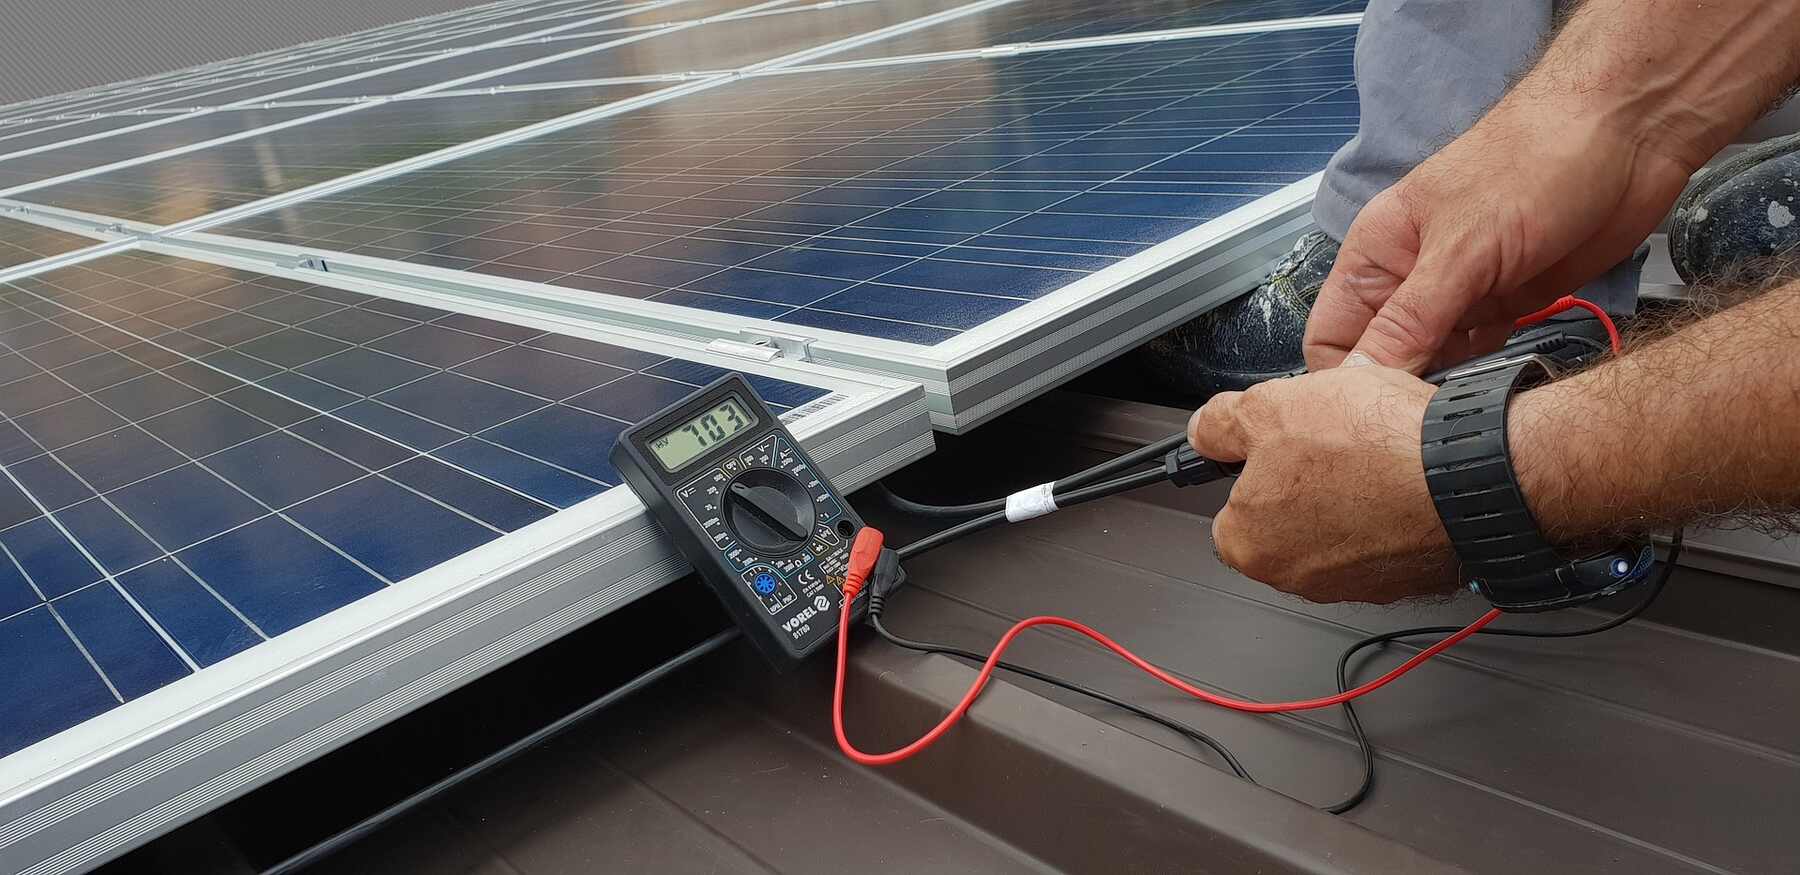 Technician checking the power supply and quality of one of the solar panels